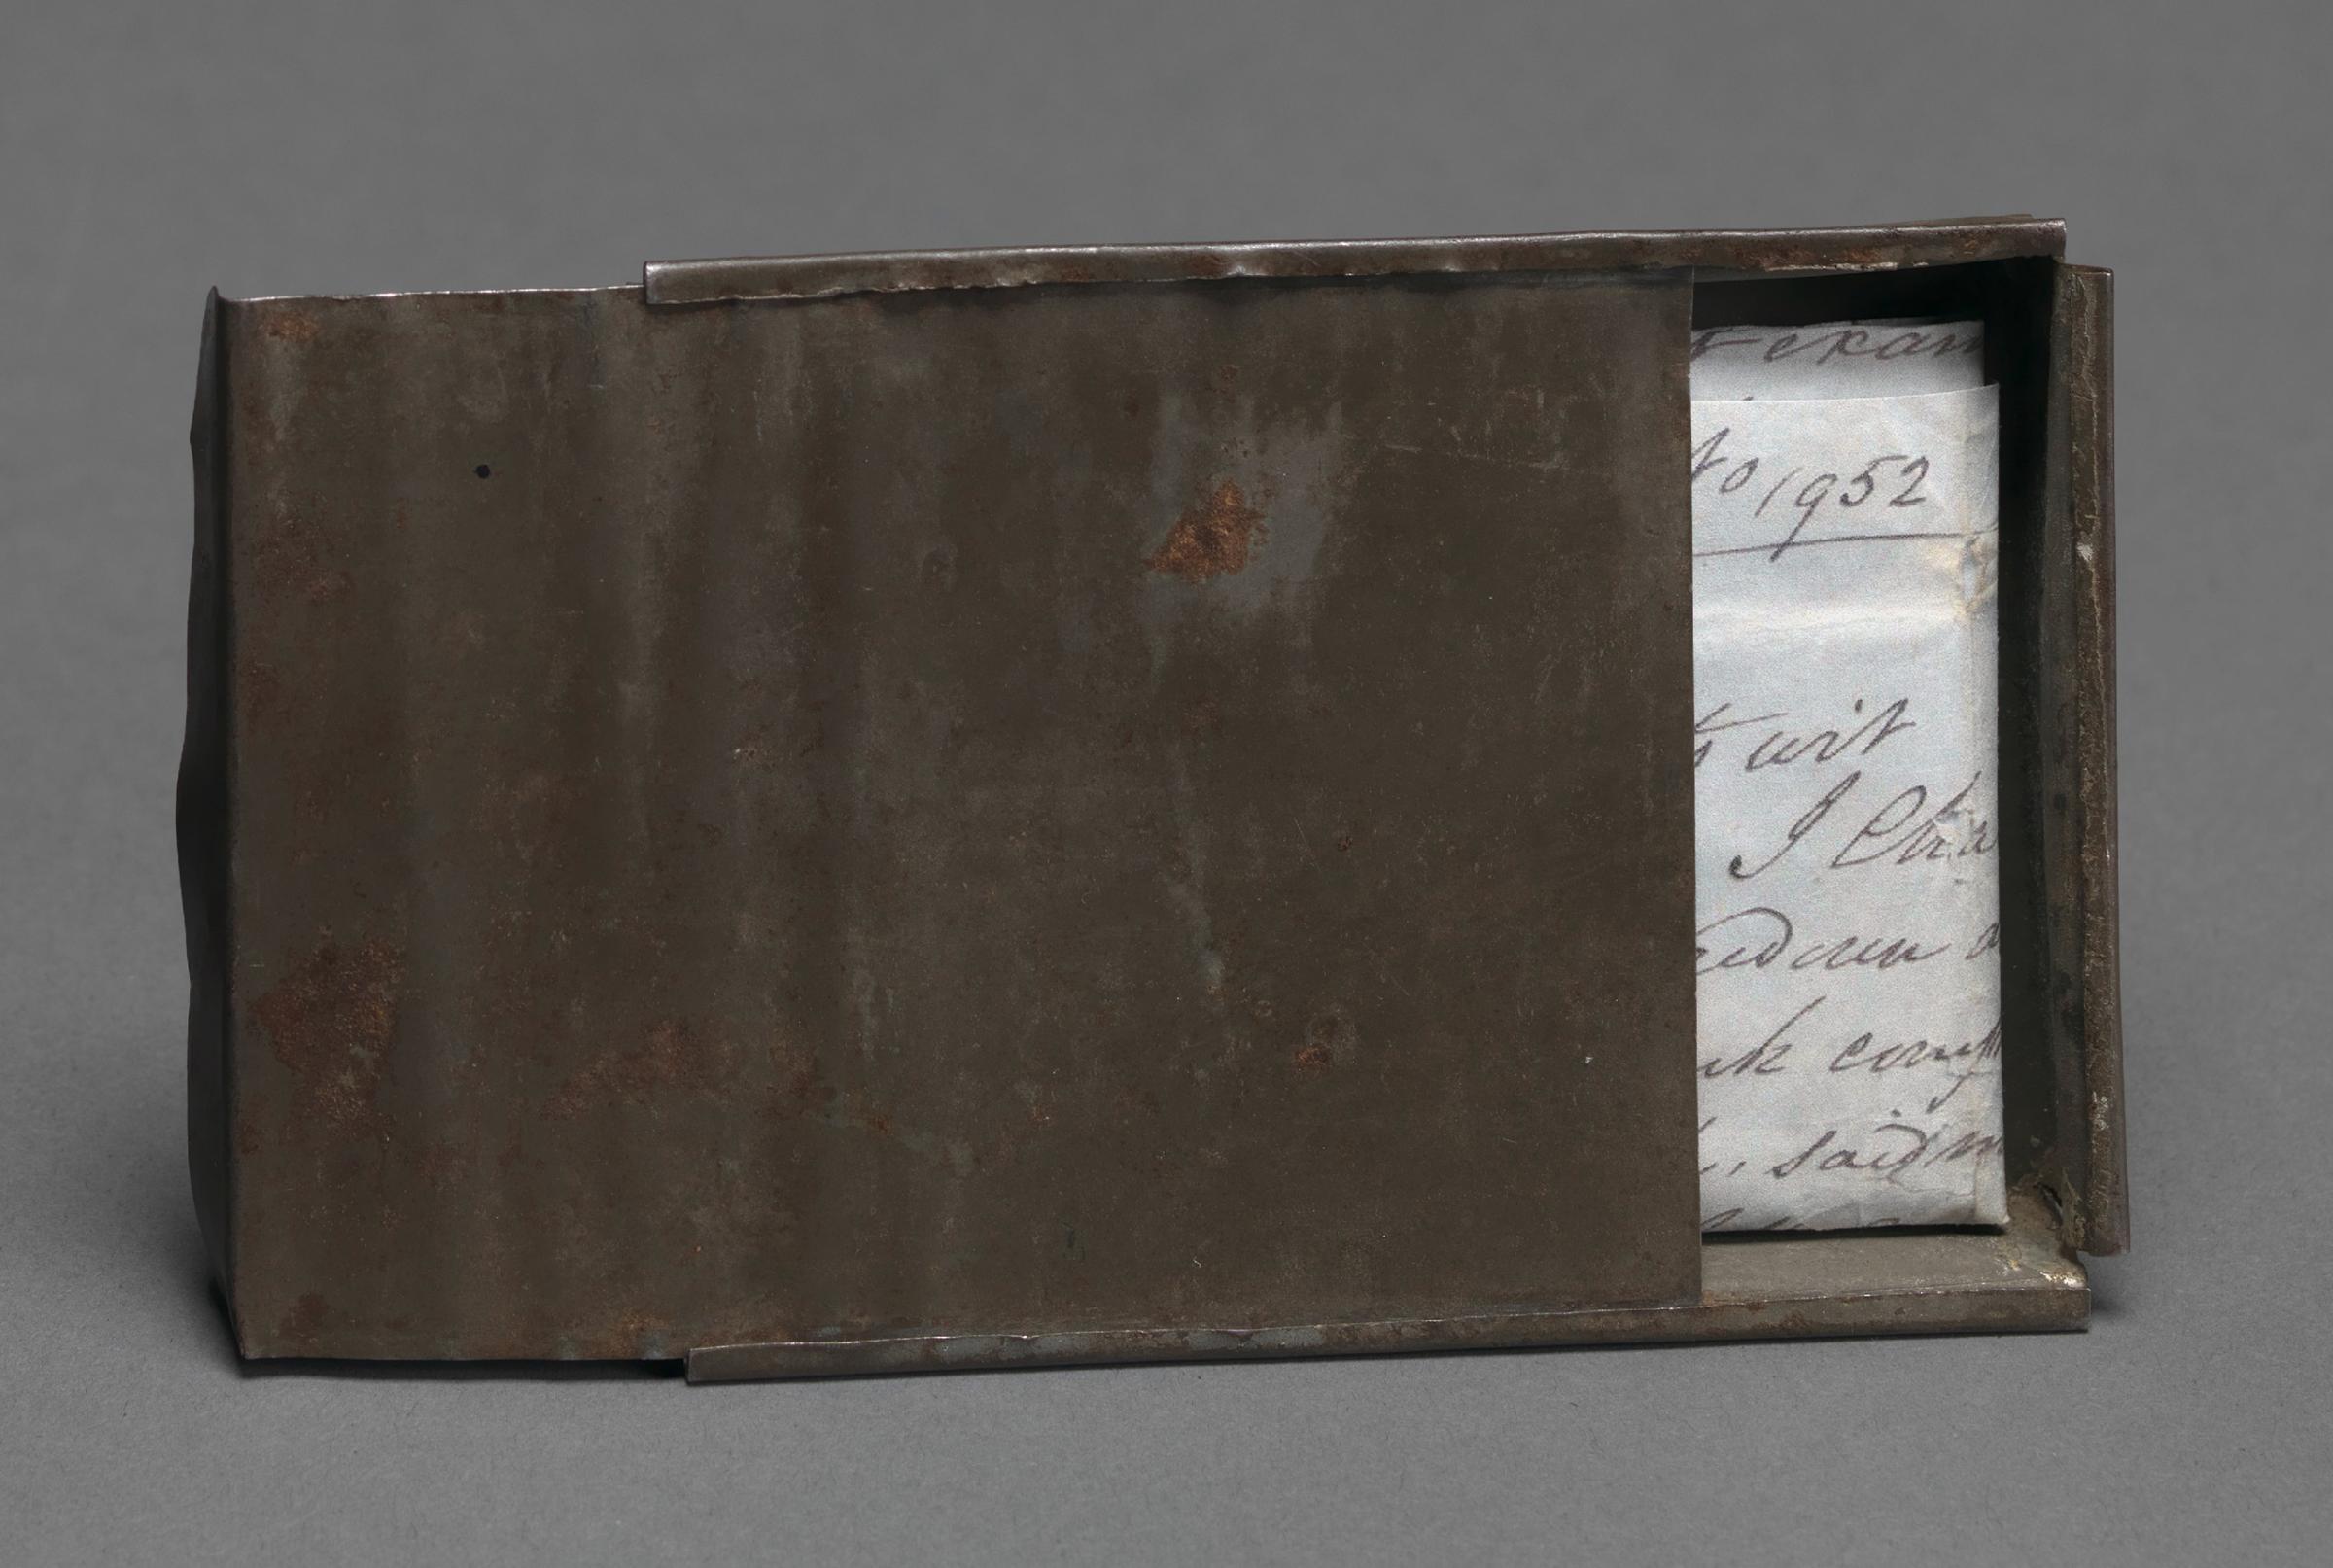 Joseph Trammel's tin box used to hold his freedom papers in 1852.